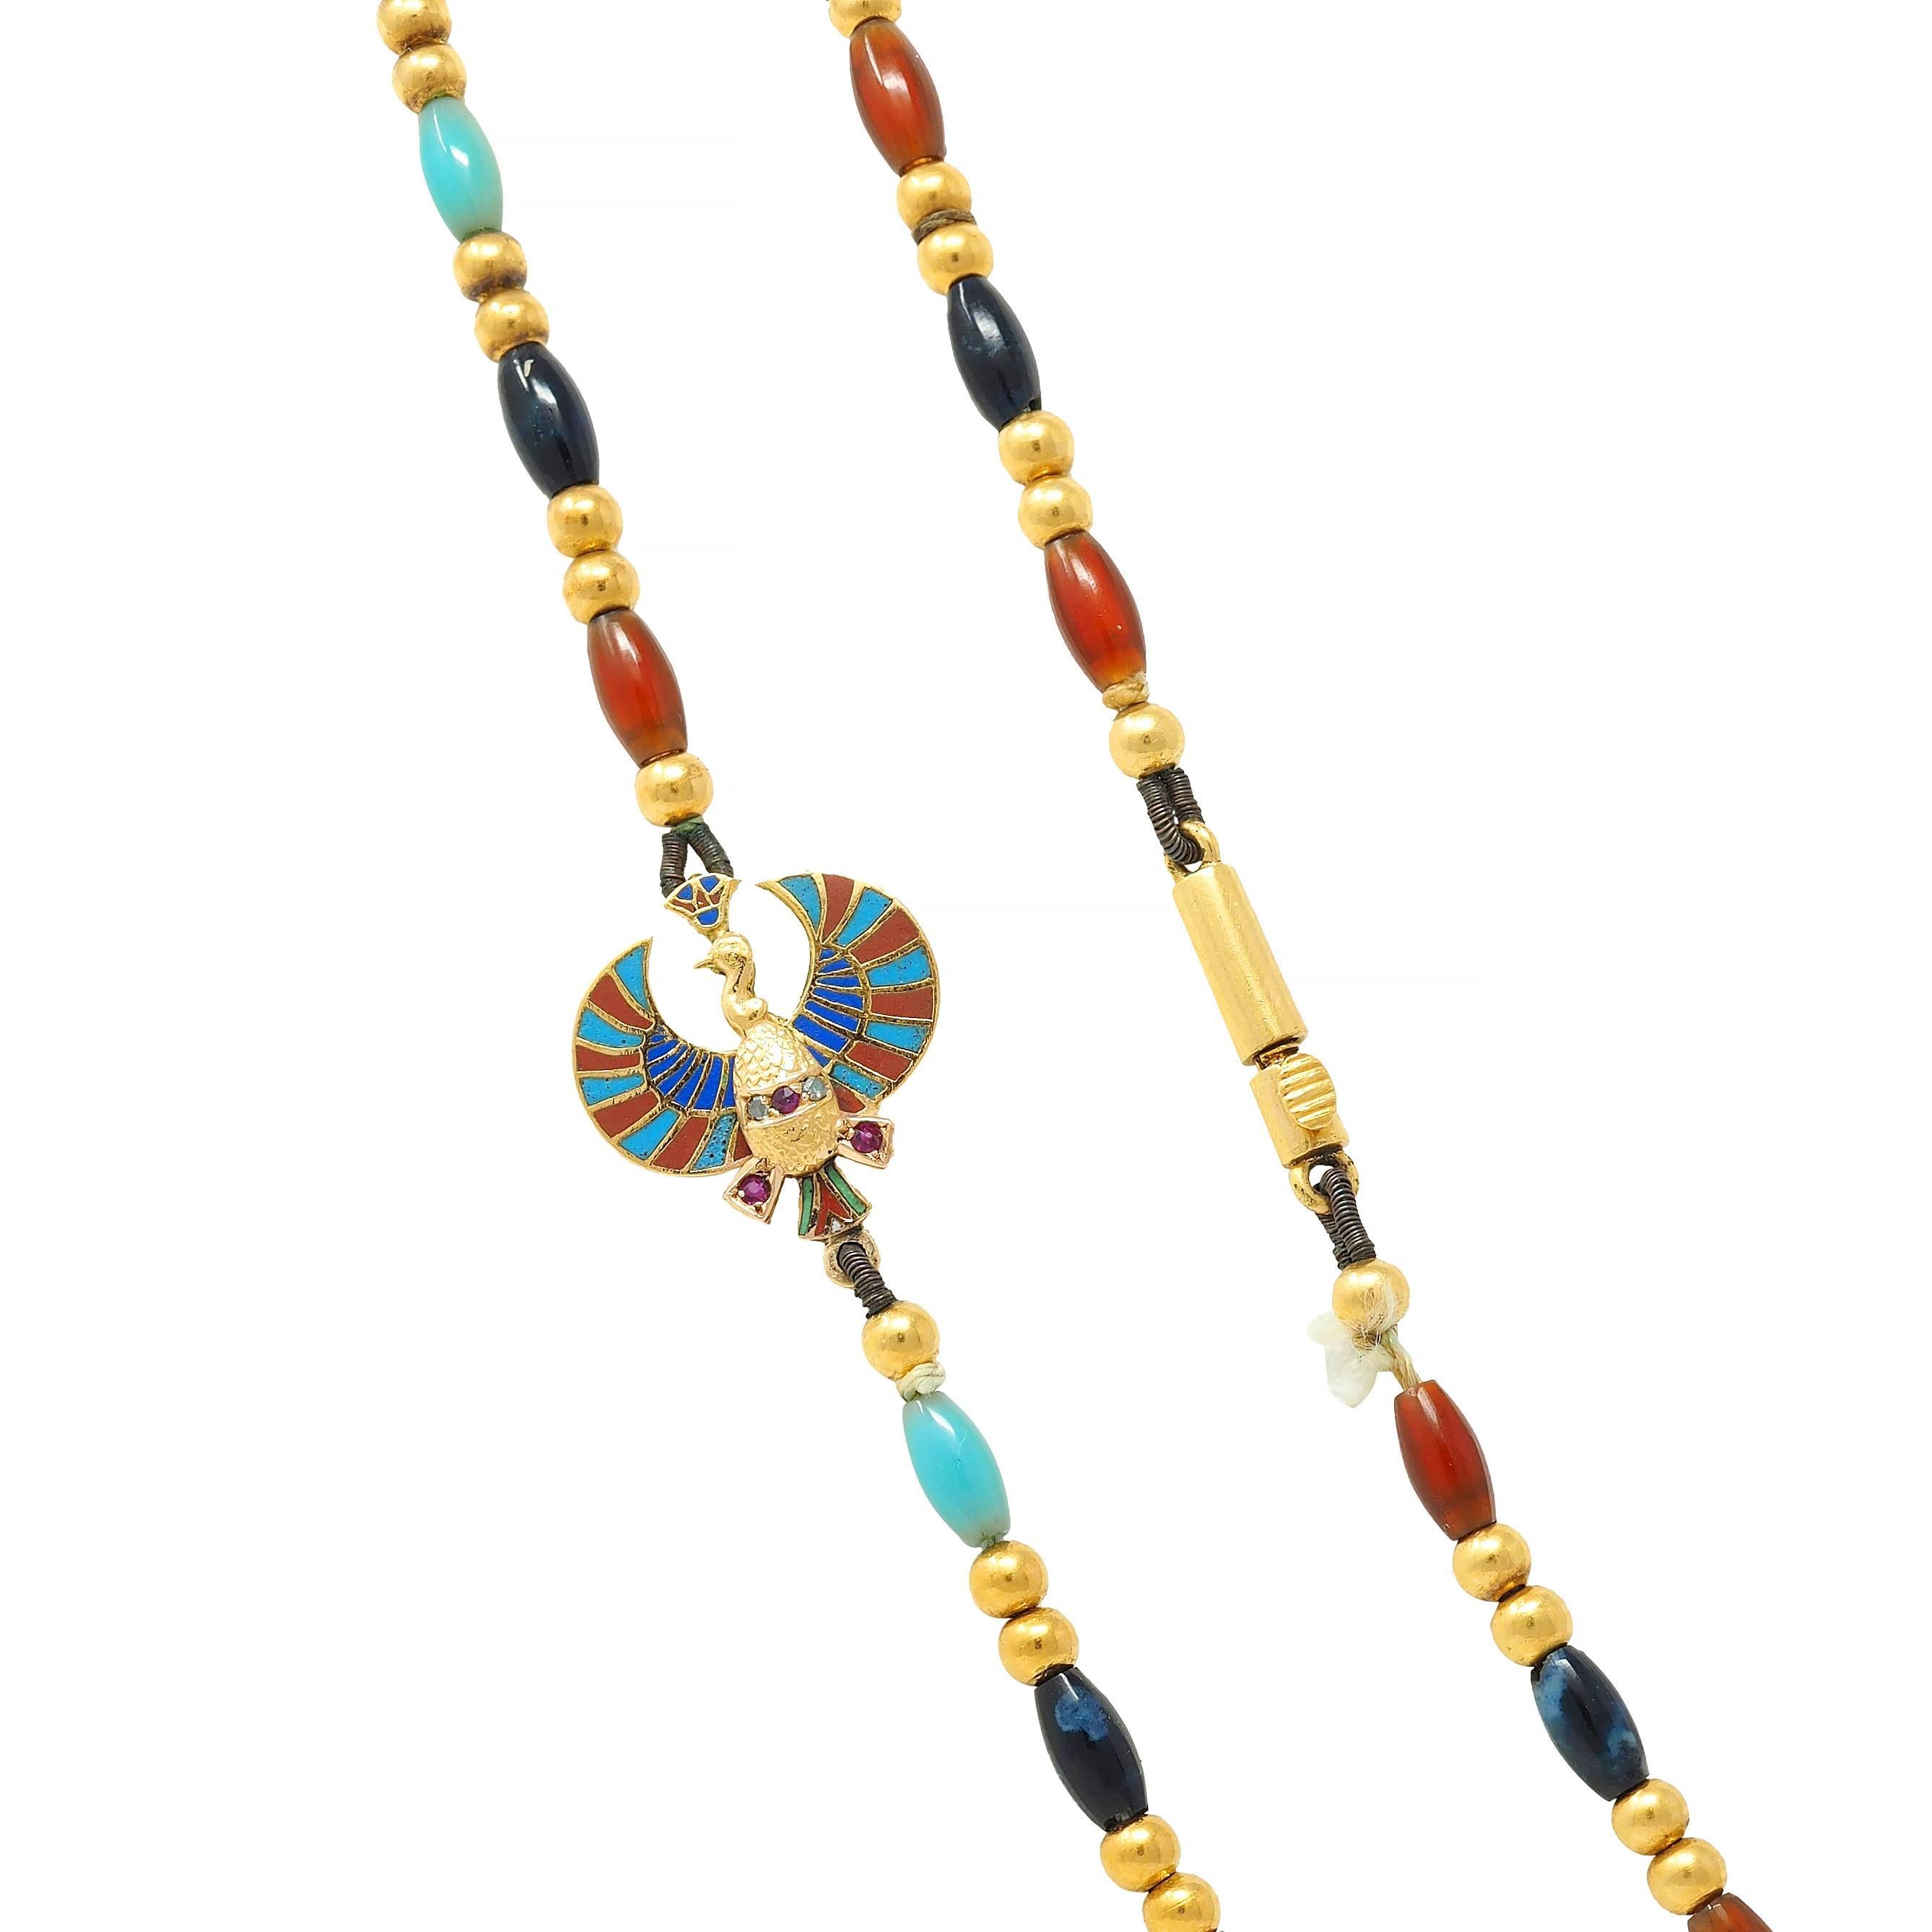 Designed as a beaded multi-gem strand with scarab and bird motif stations 
Comprised of turquoise, carnelian, and lapis lazuli barrel beads
Opaque light blue, medium blue, and translucent reddish-orange in color, respectively
Measuring 3.0 x 6.0 mm